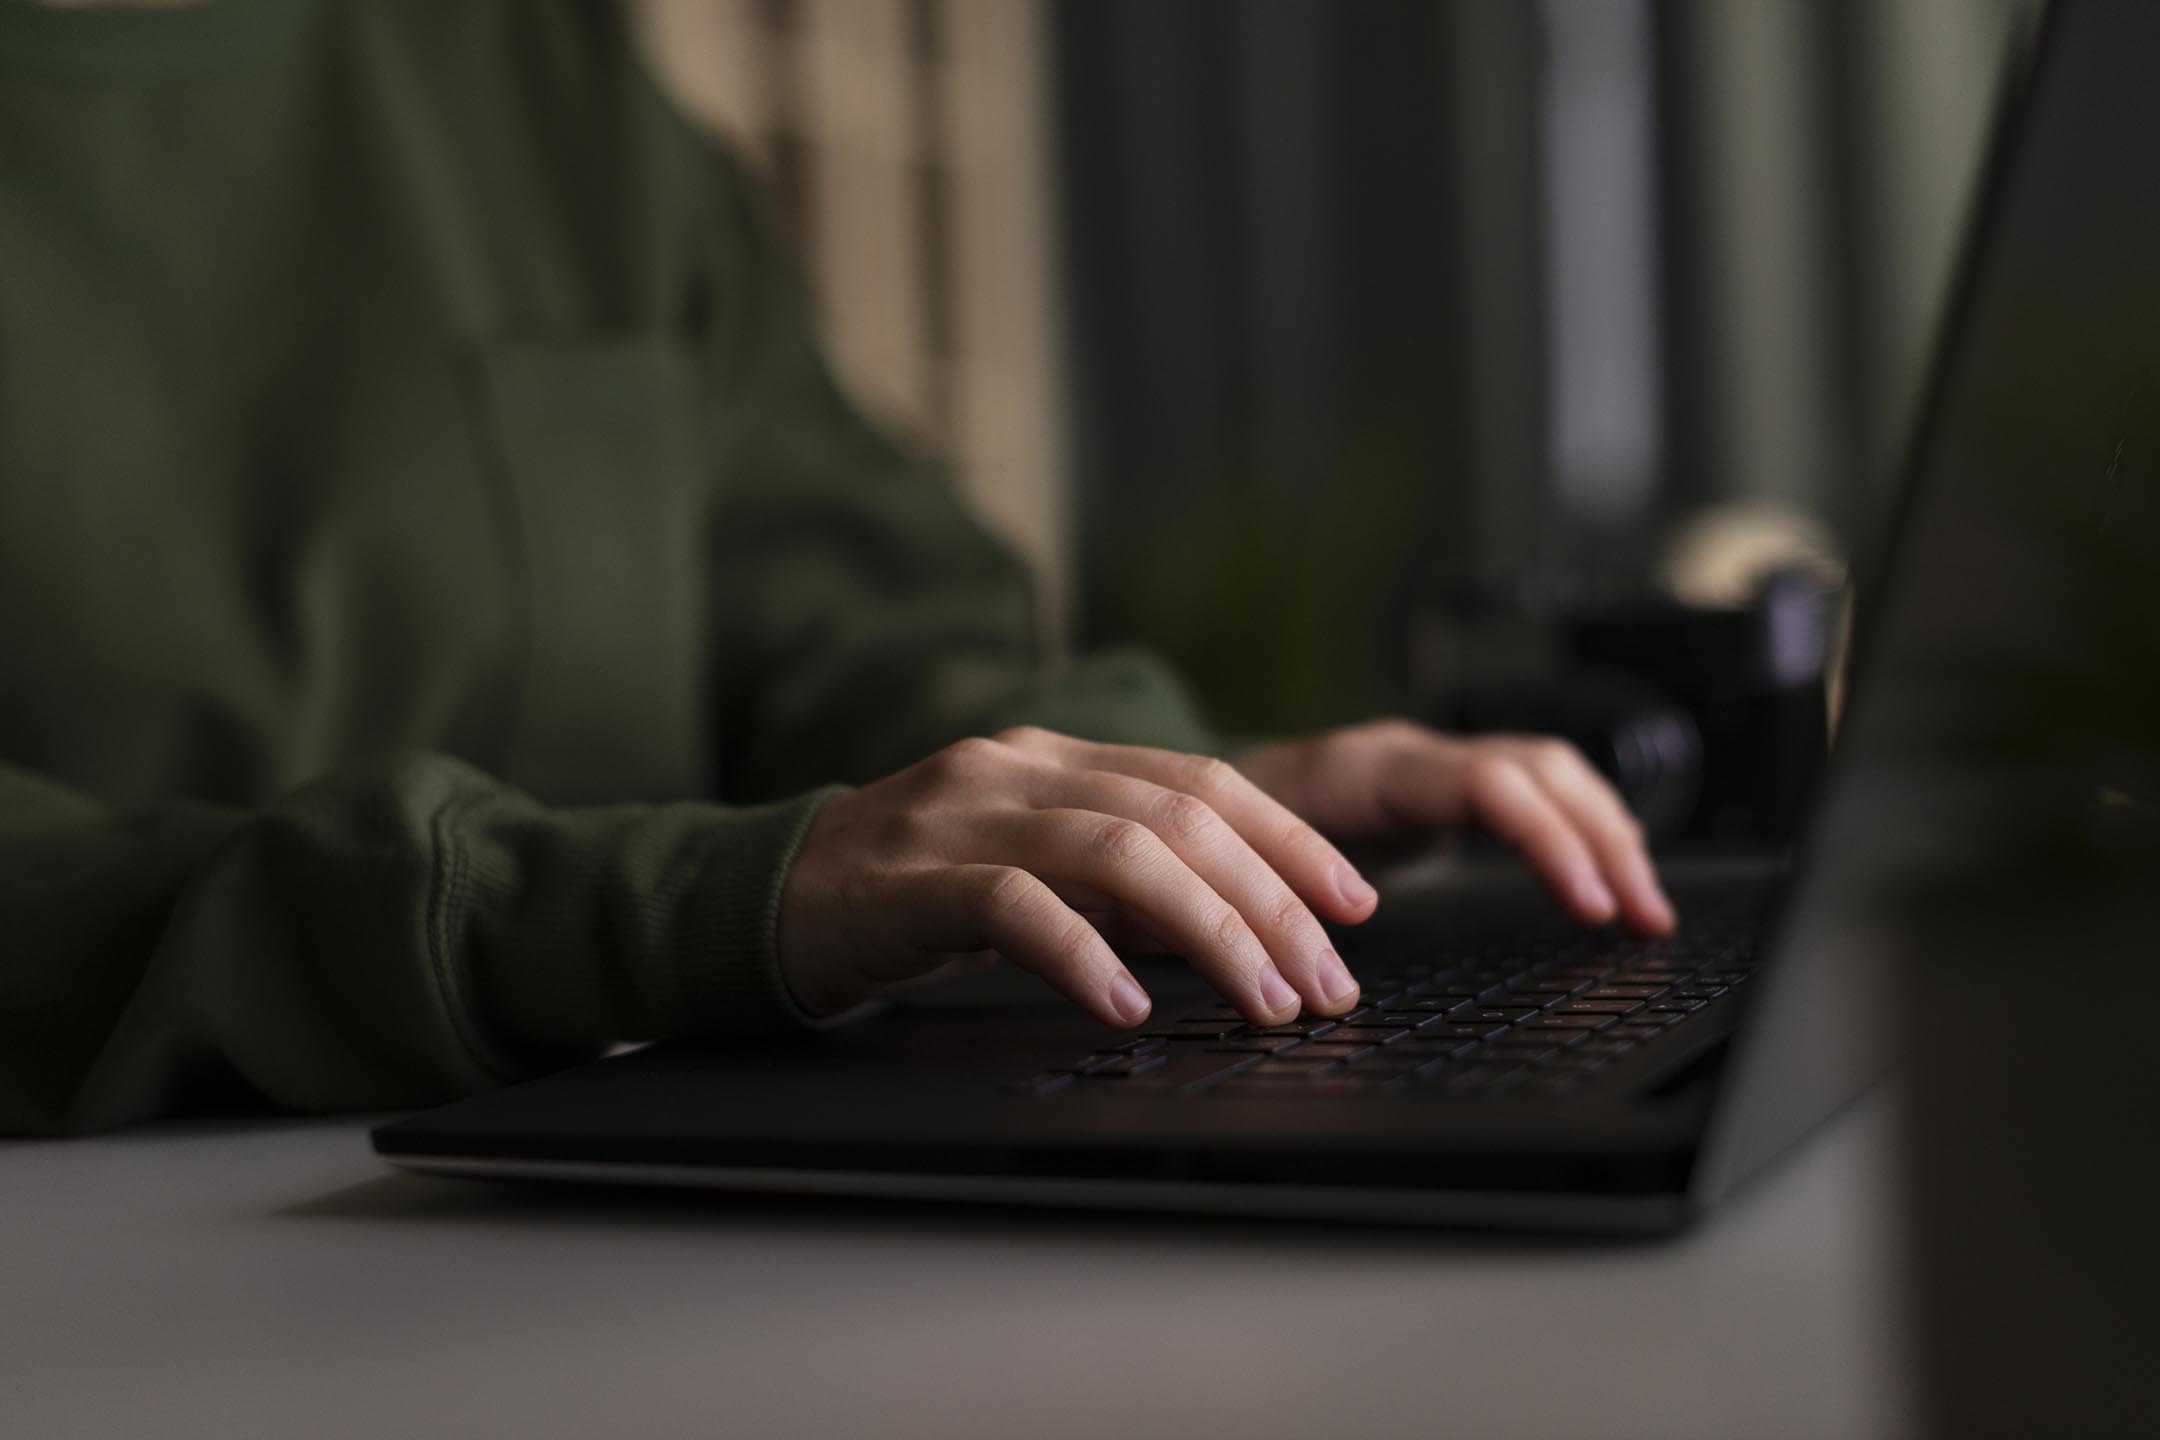 A woman typing on her laptop